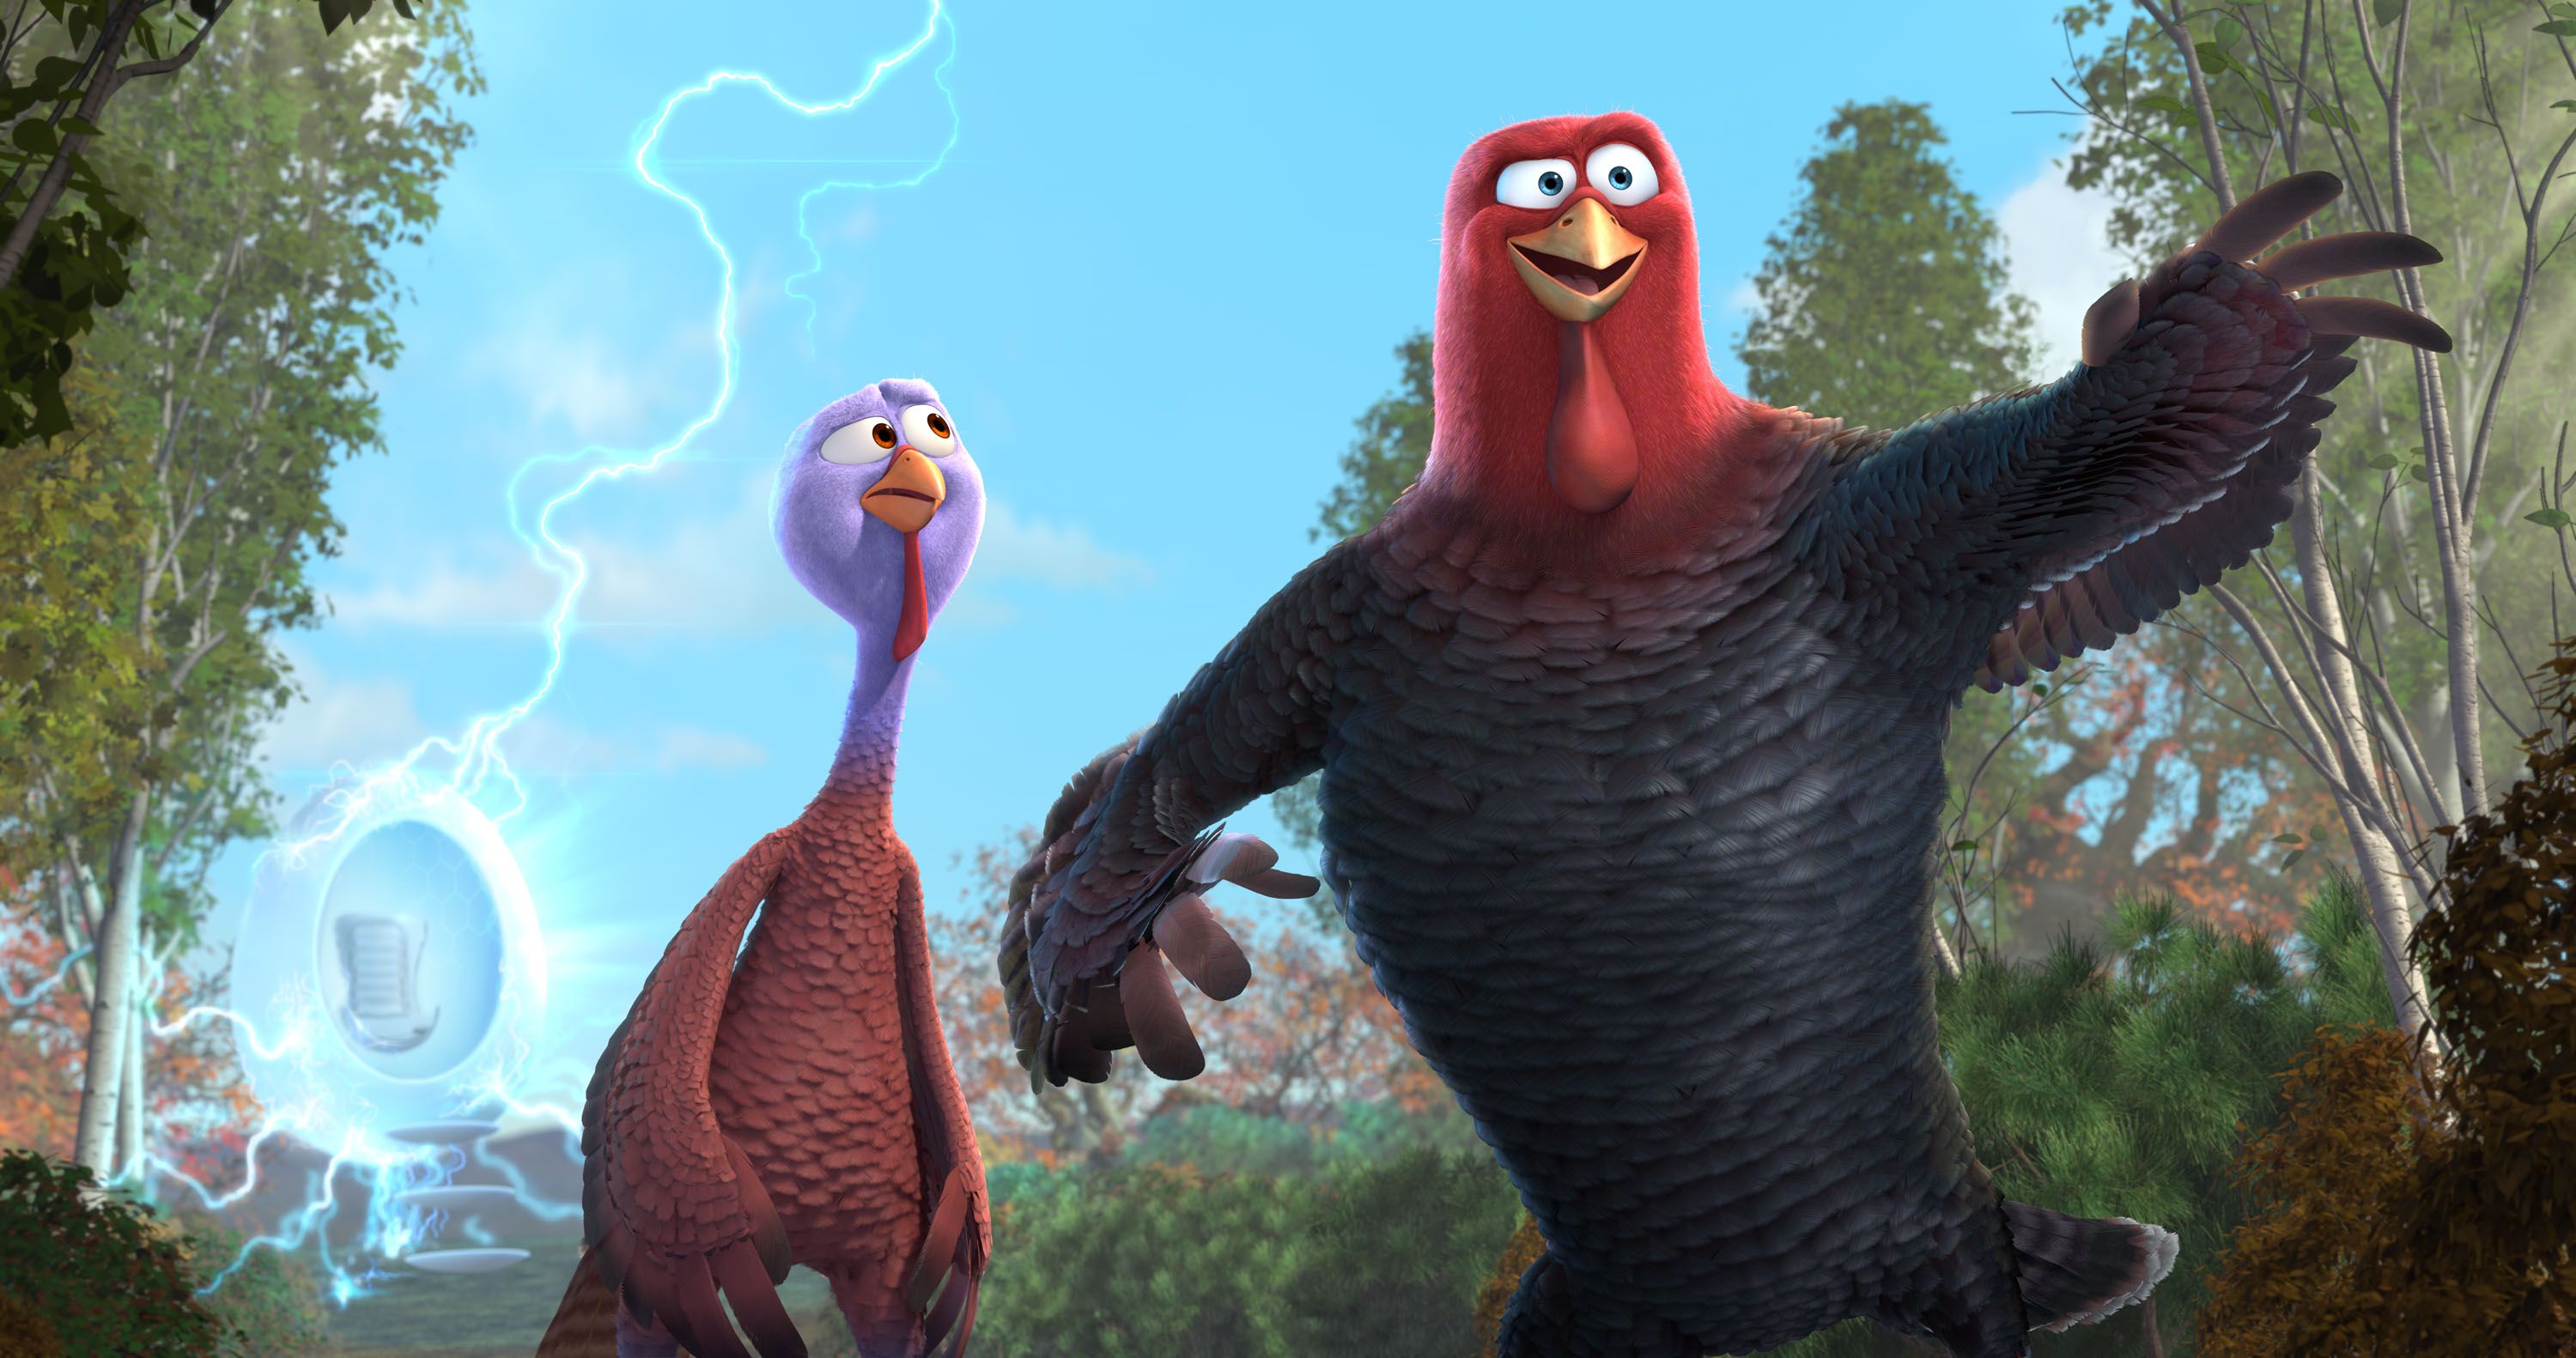 FREE BIRDS Images. FREE BIRDS Features the Voices of Owen Wilson, Woody Harrelson, and ...3000 x 1582